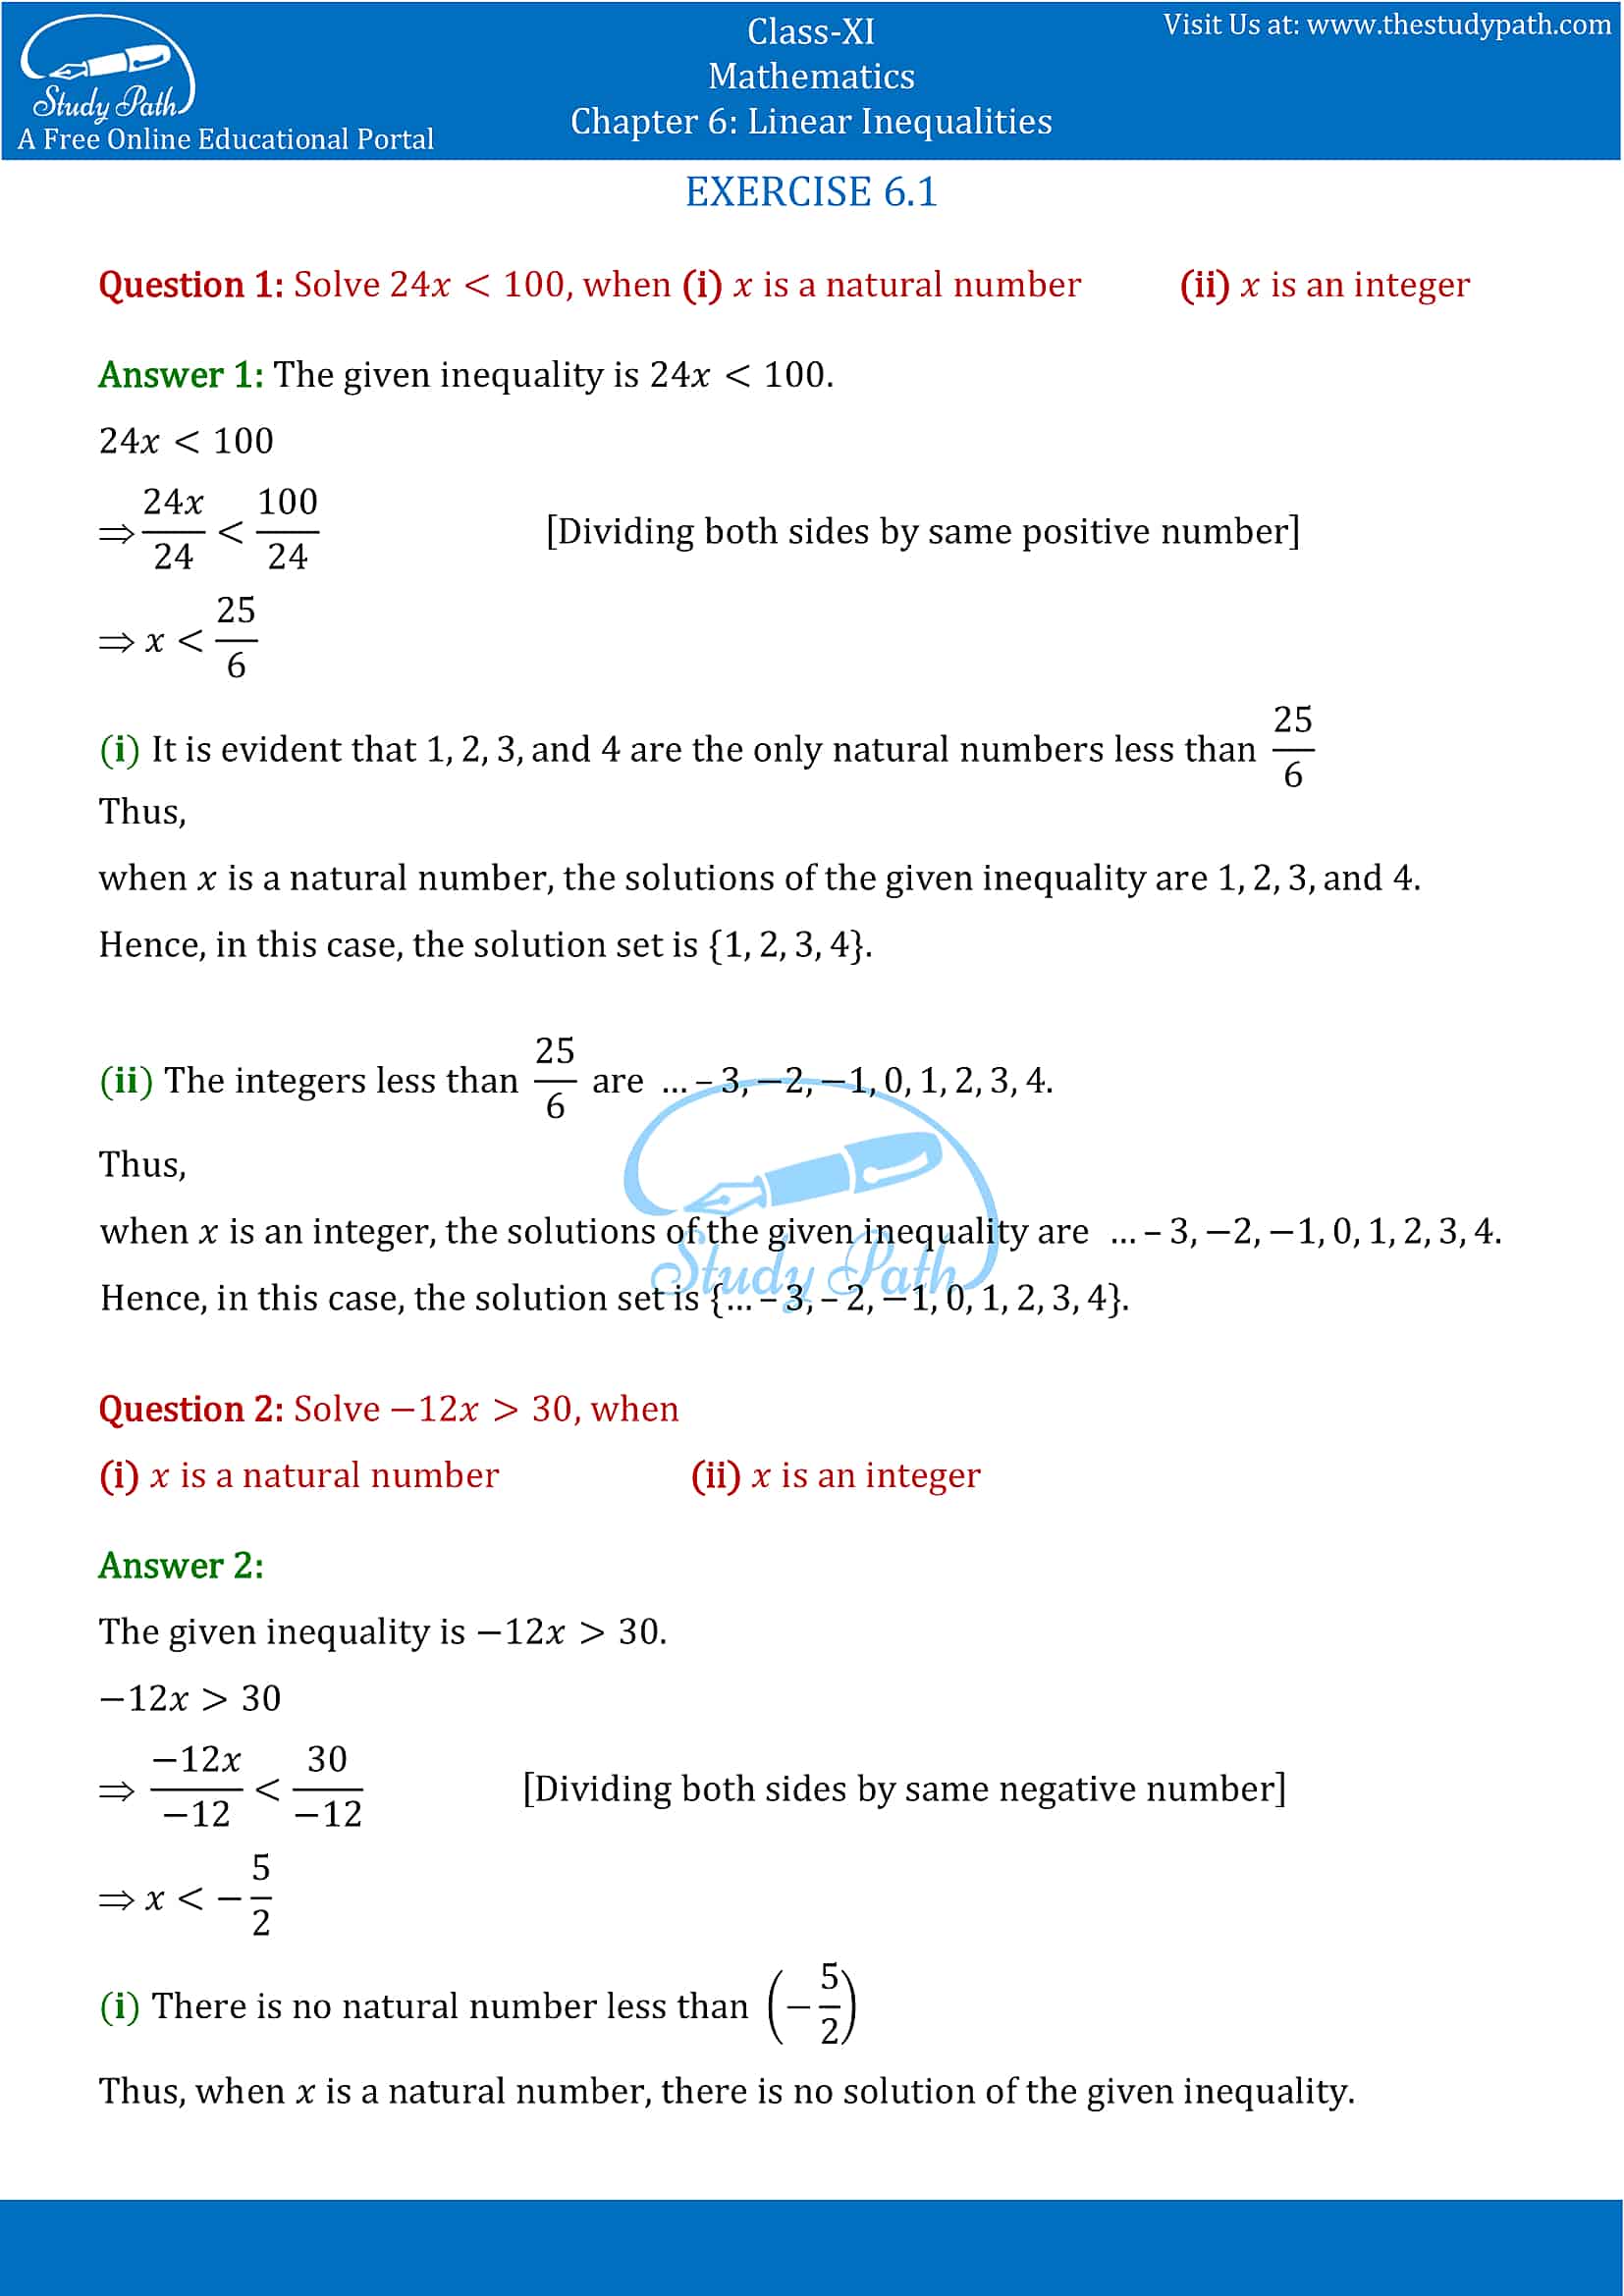 NCERT Solutions for Class 11 Maths chapter 6 Linear Inequalities Exercise 6.1 Part-1